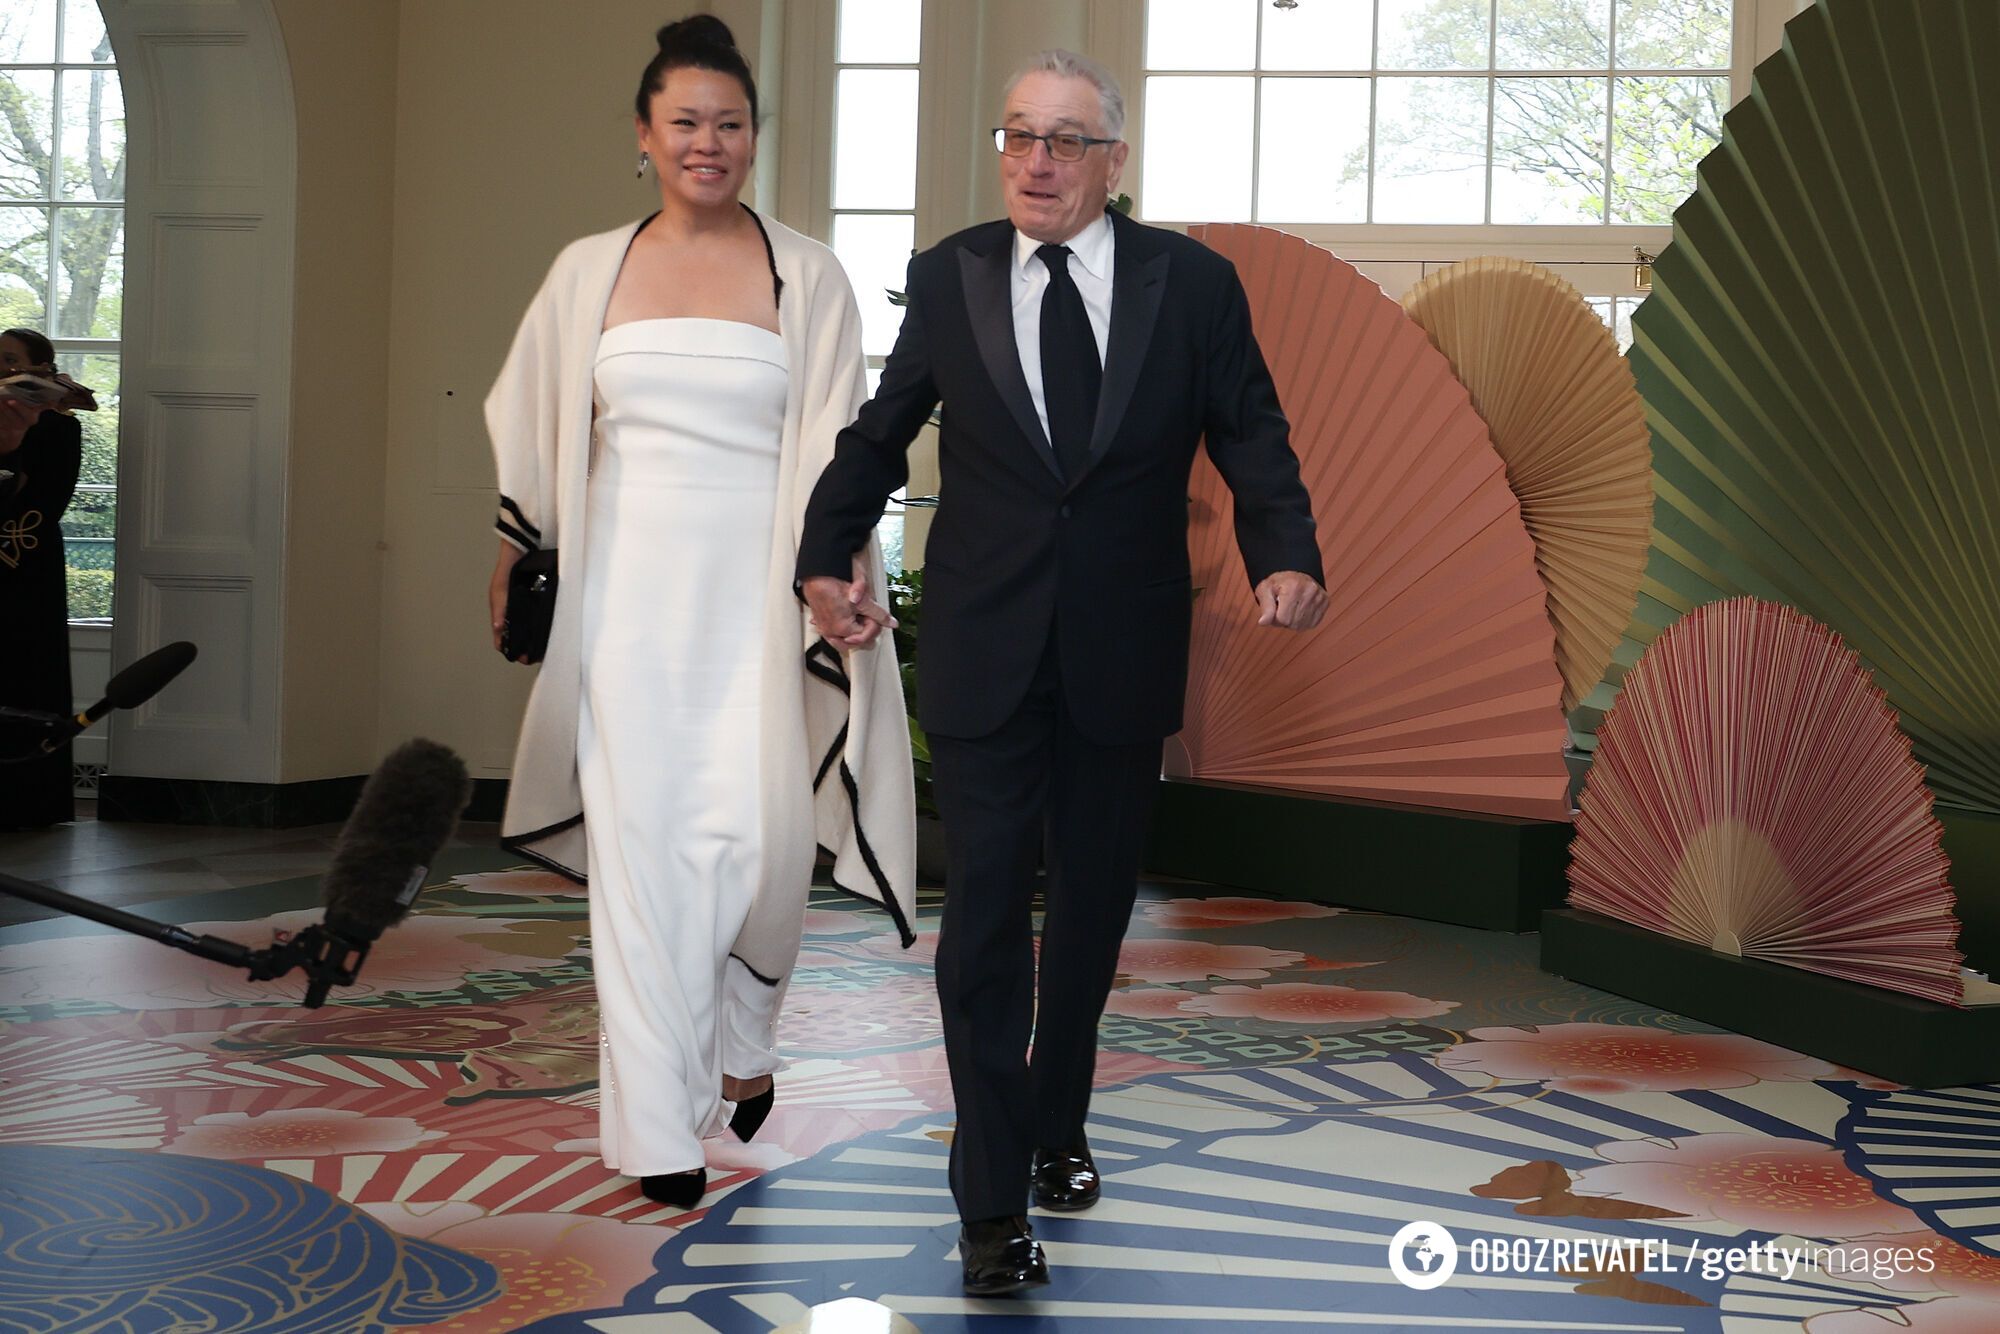 He is 80, she is 45. Robert De Niro appeared at a luxury dinner with his girlfriend